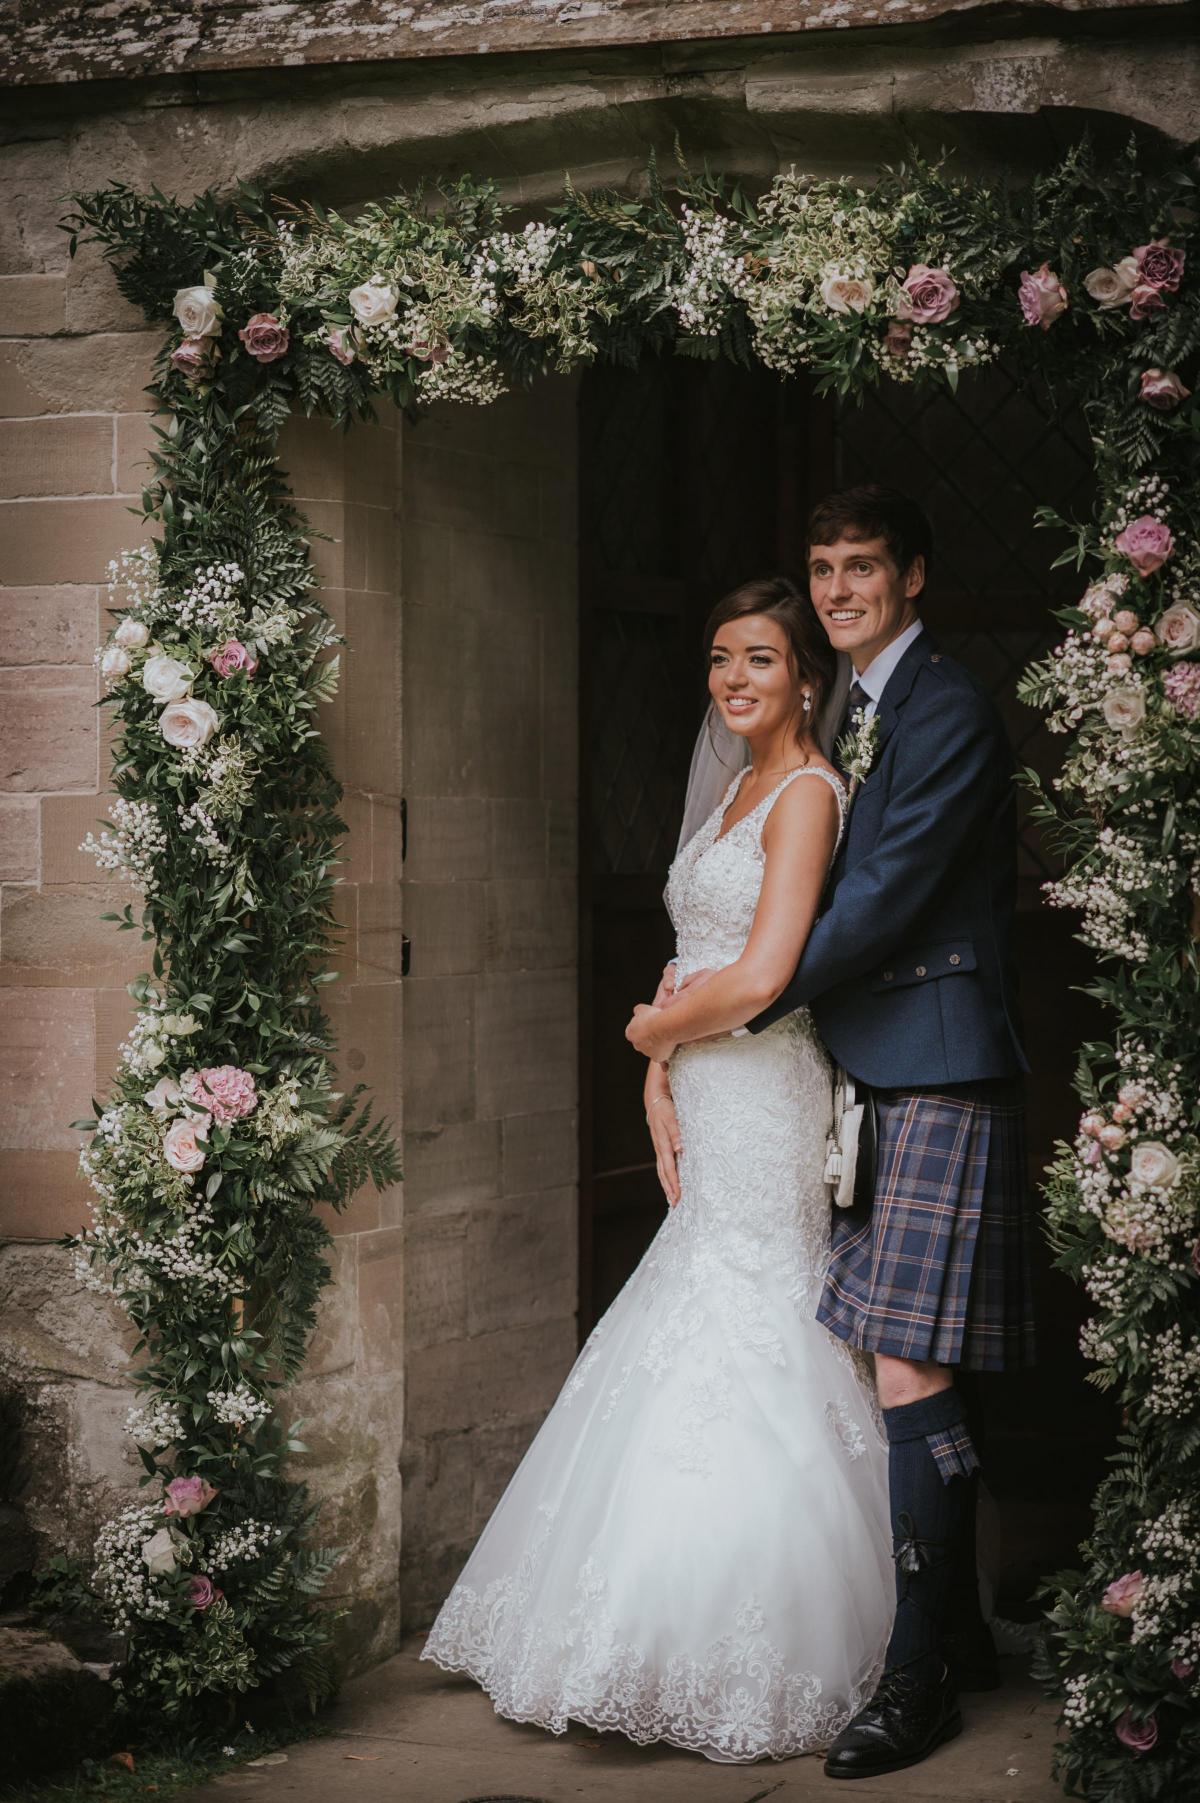 Fiona Stevenson, formerly of Pitlochry, and Calum Scott, formerly of Falkirk, now both Aberdeen, were married recently in Dunkeld Cathedral
Photo: Aboyne Photographics